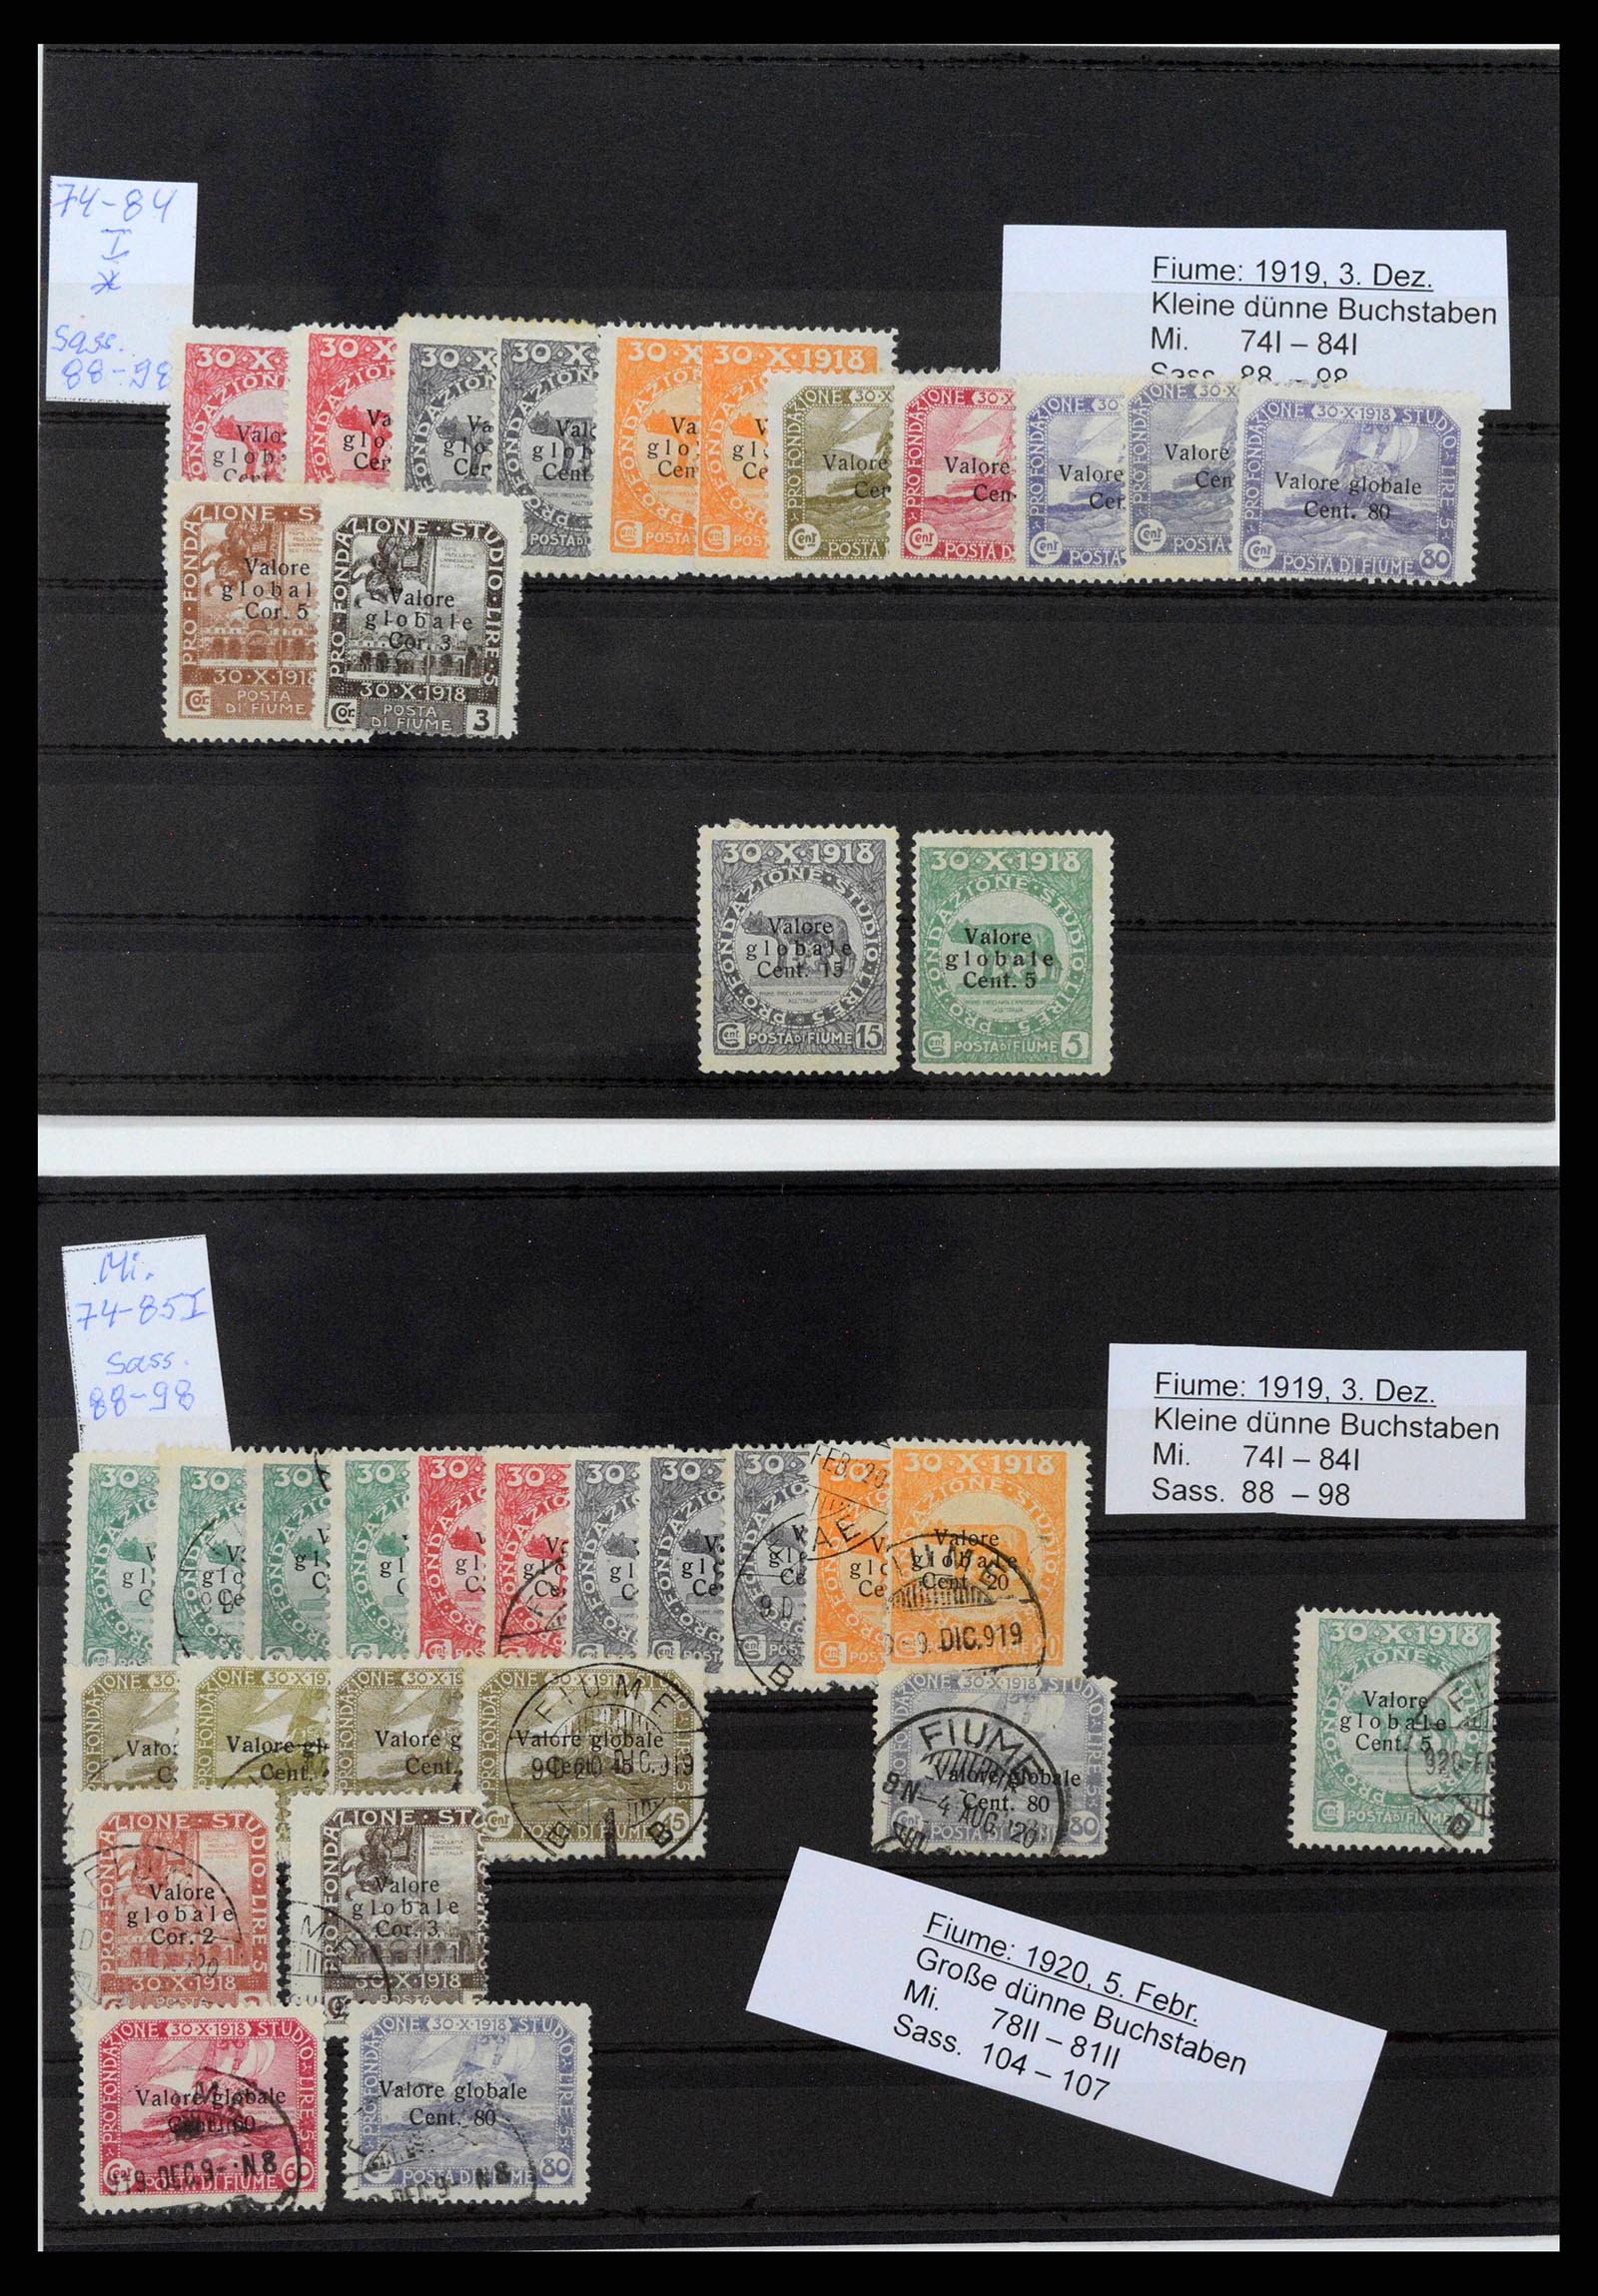 38507 0046 - Stamp collection 38507 Fiume 1920-1924.